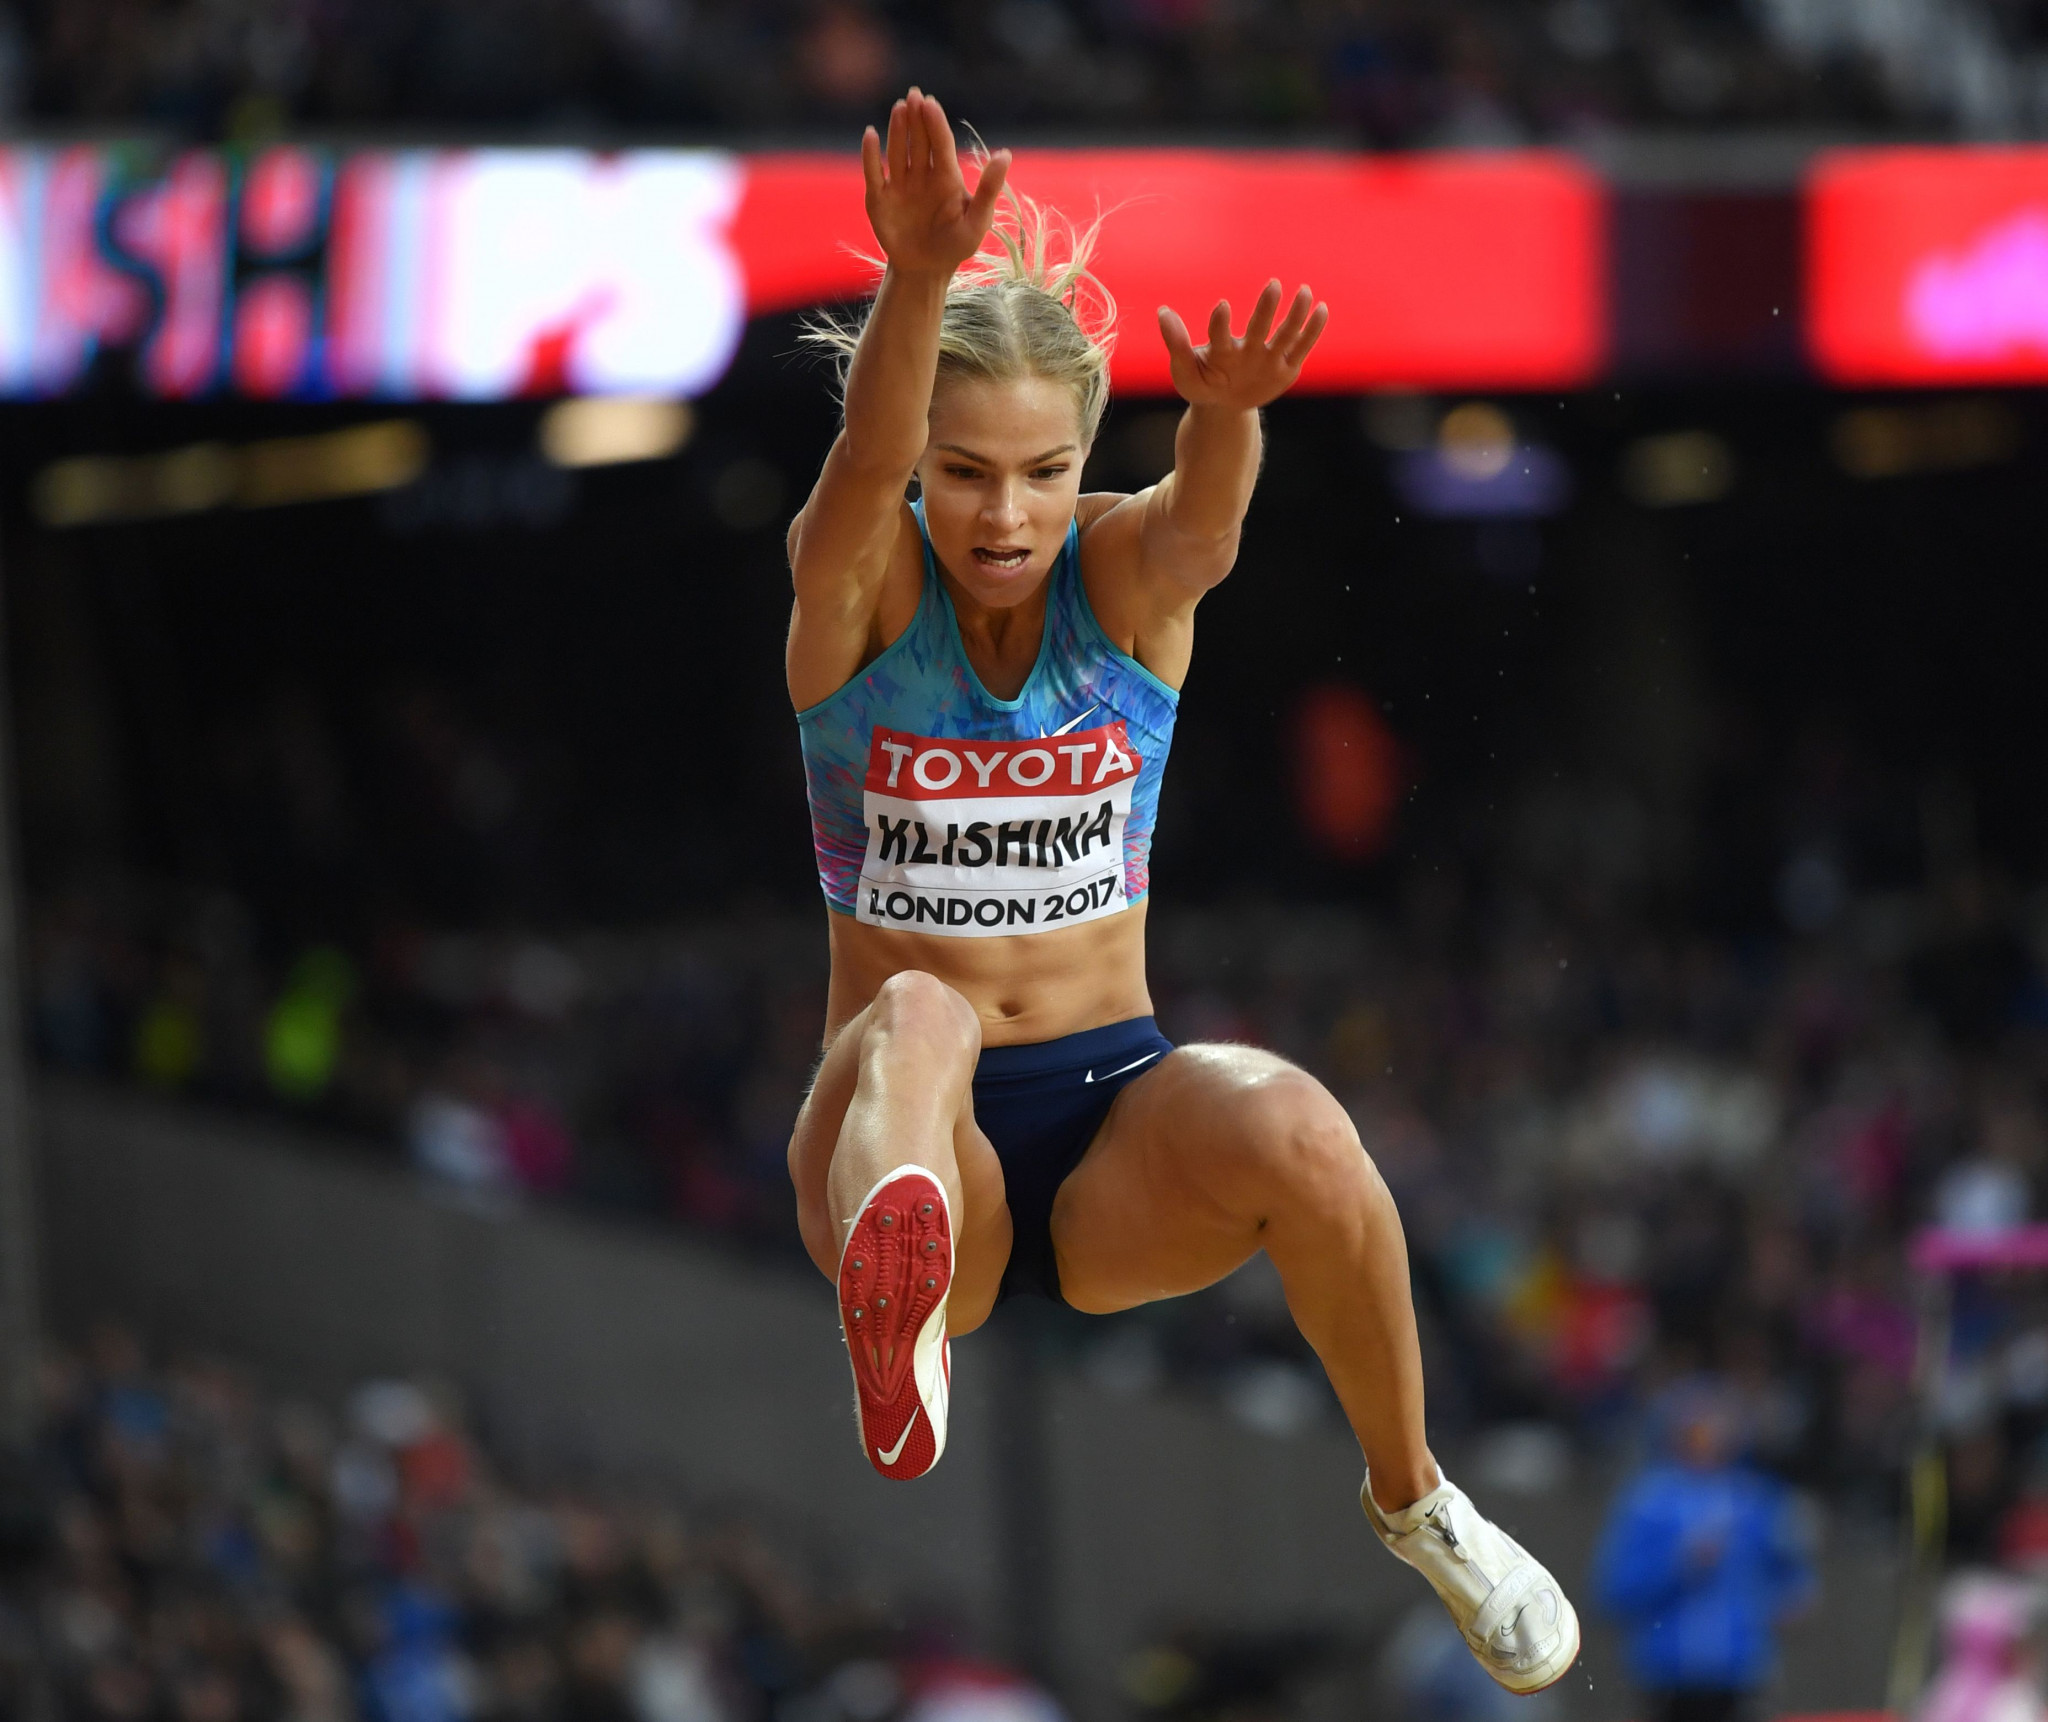 Darya Klishina was among 19 Russians who competed as an Authorised Neutral Athlete at the 2017 IAAF World Championships in London ©Getty Images